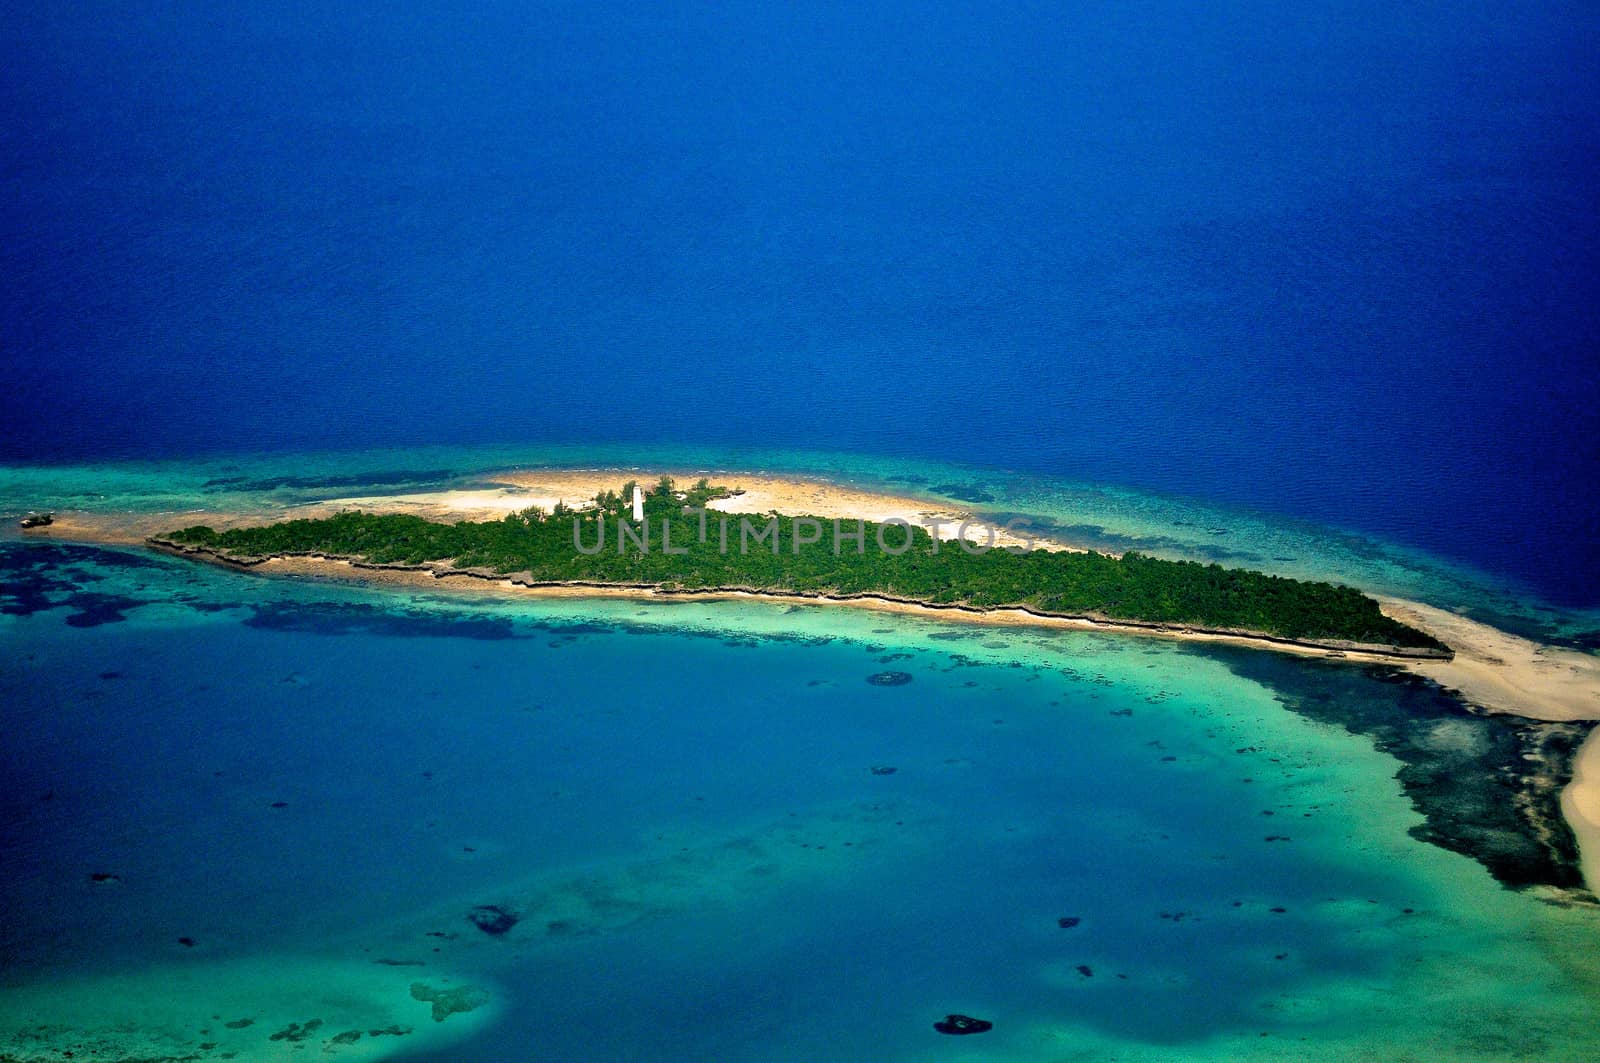 aerial view of Mnemba island by moizhusein